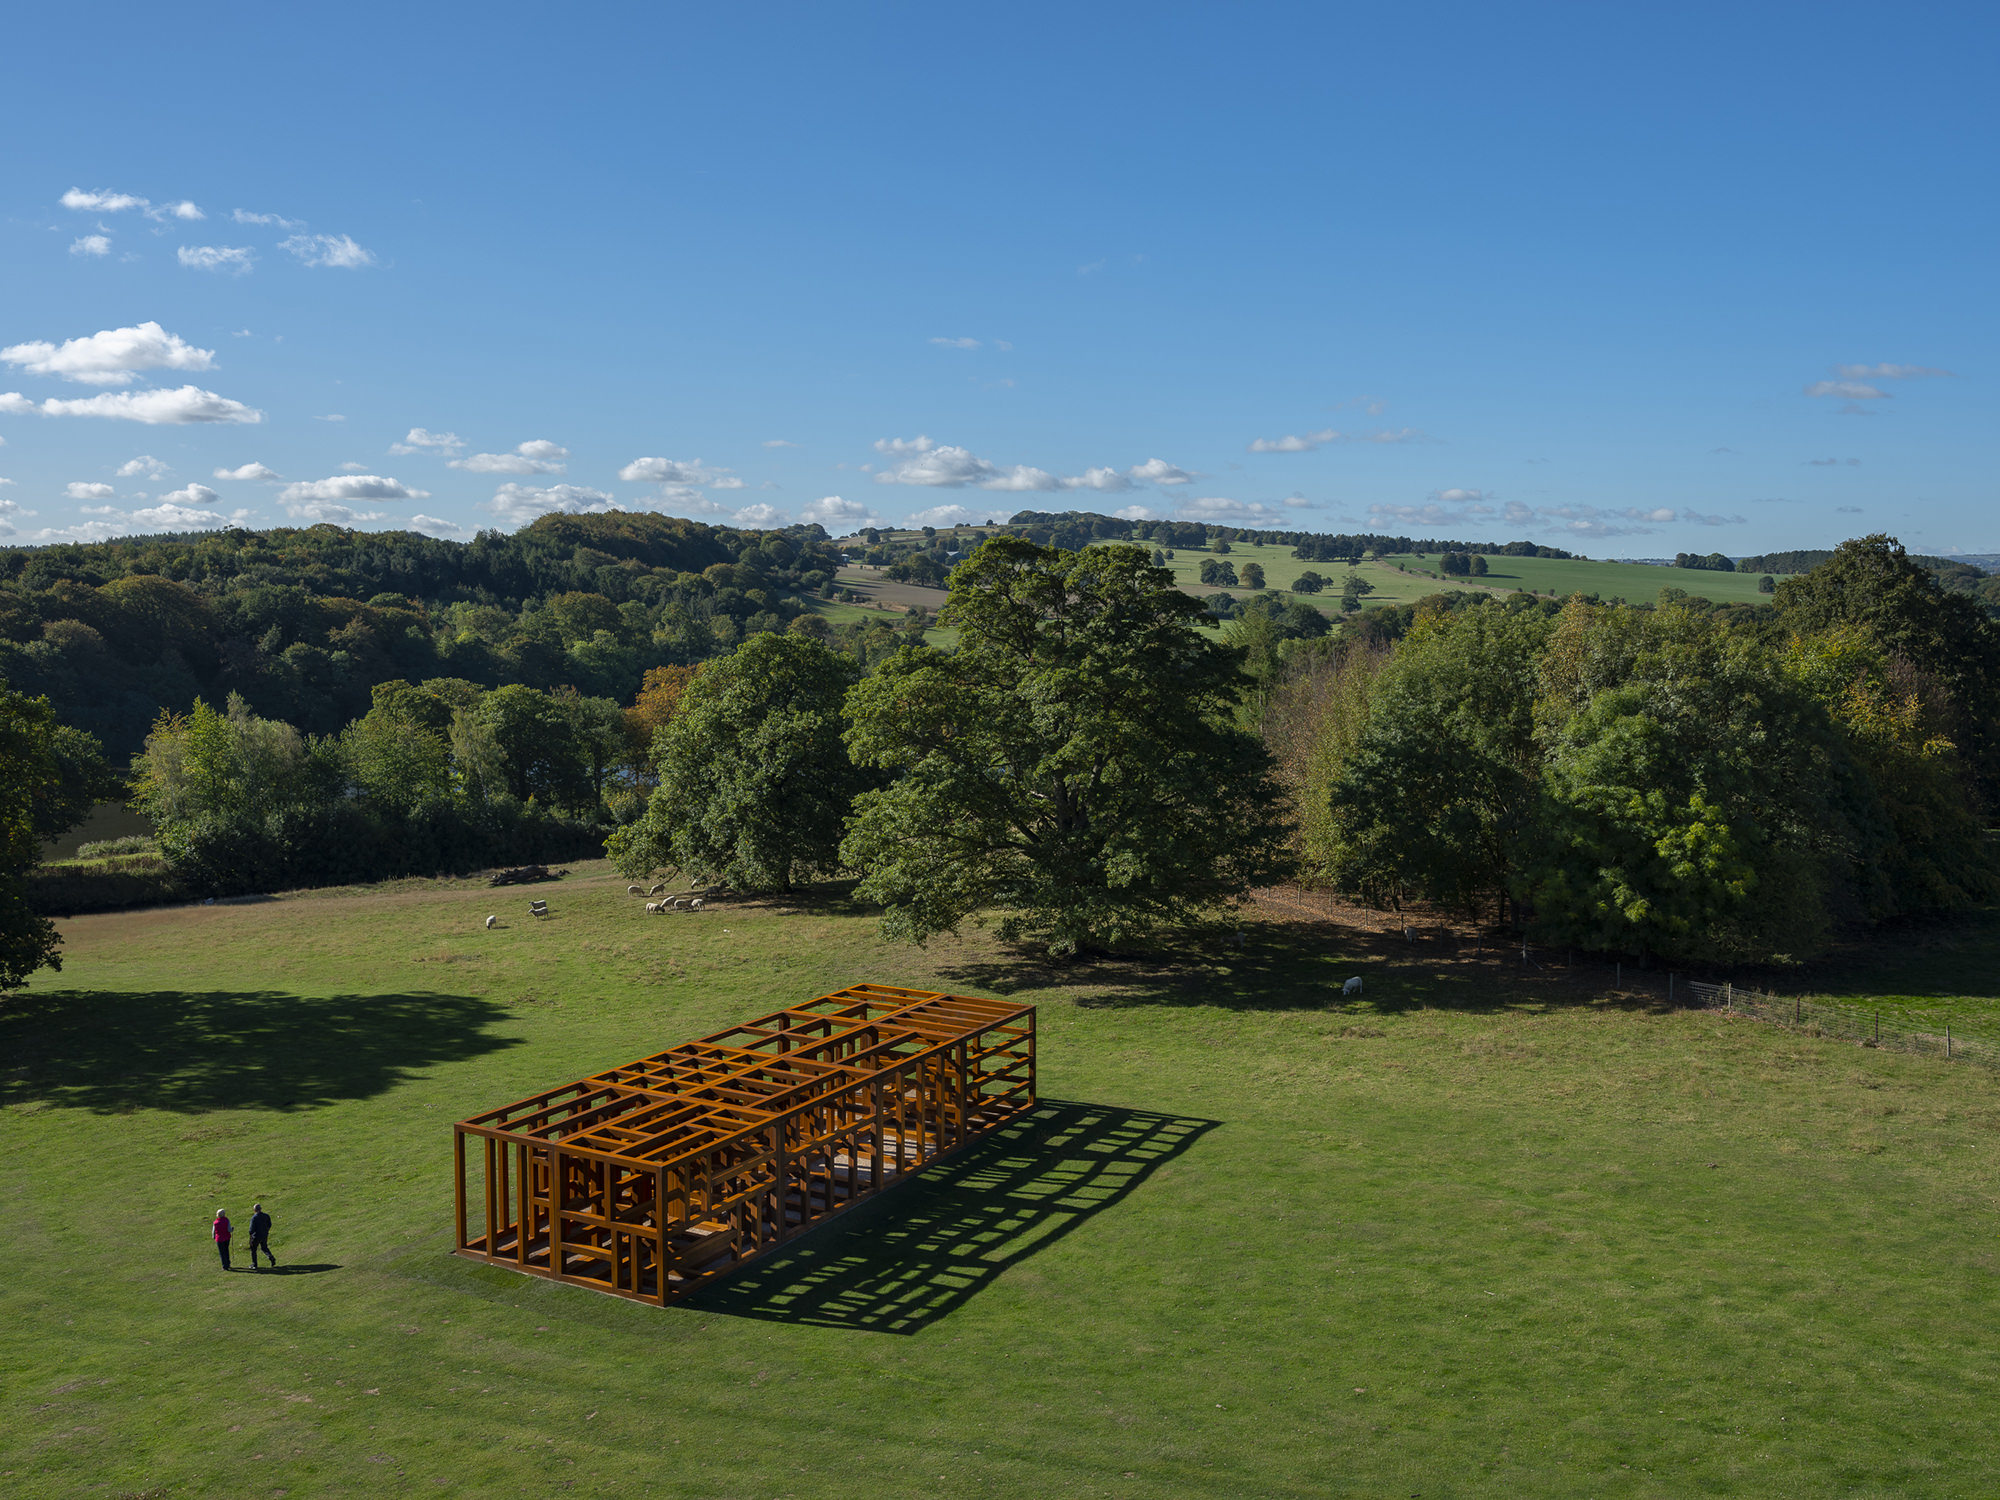 Sean Scully Crate of Air 2018 Courtesy the artist and YSP at Yorkshire Sculpture Park